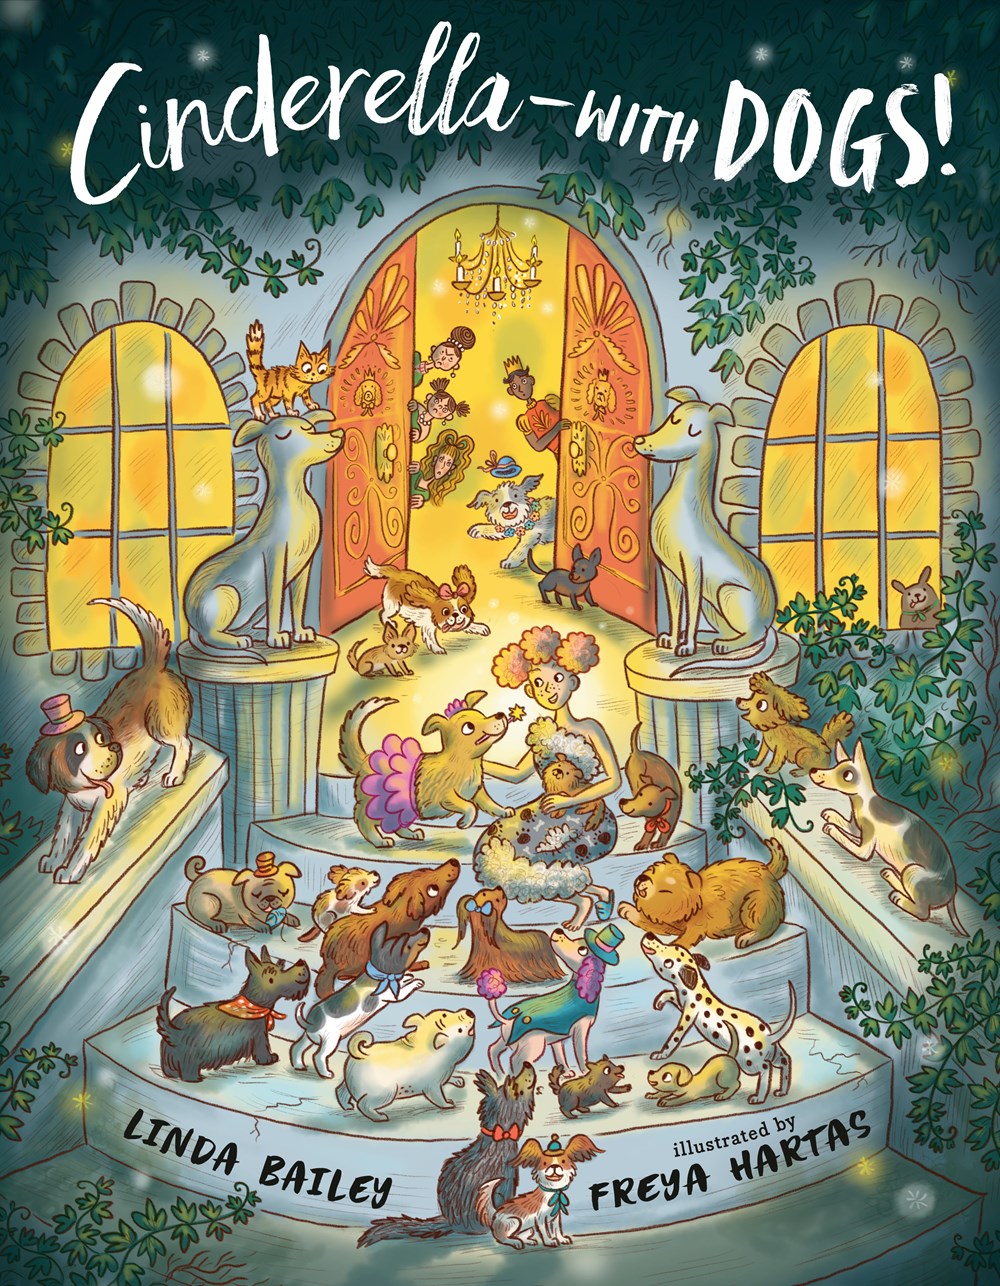 Cinderella–with Dogs! by Linda Bailey